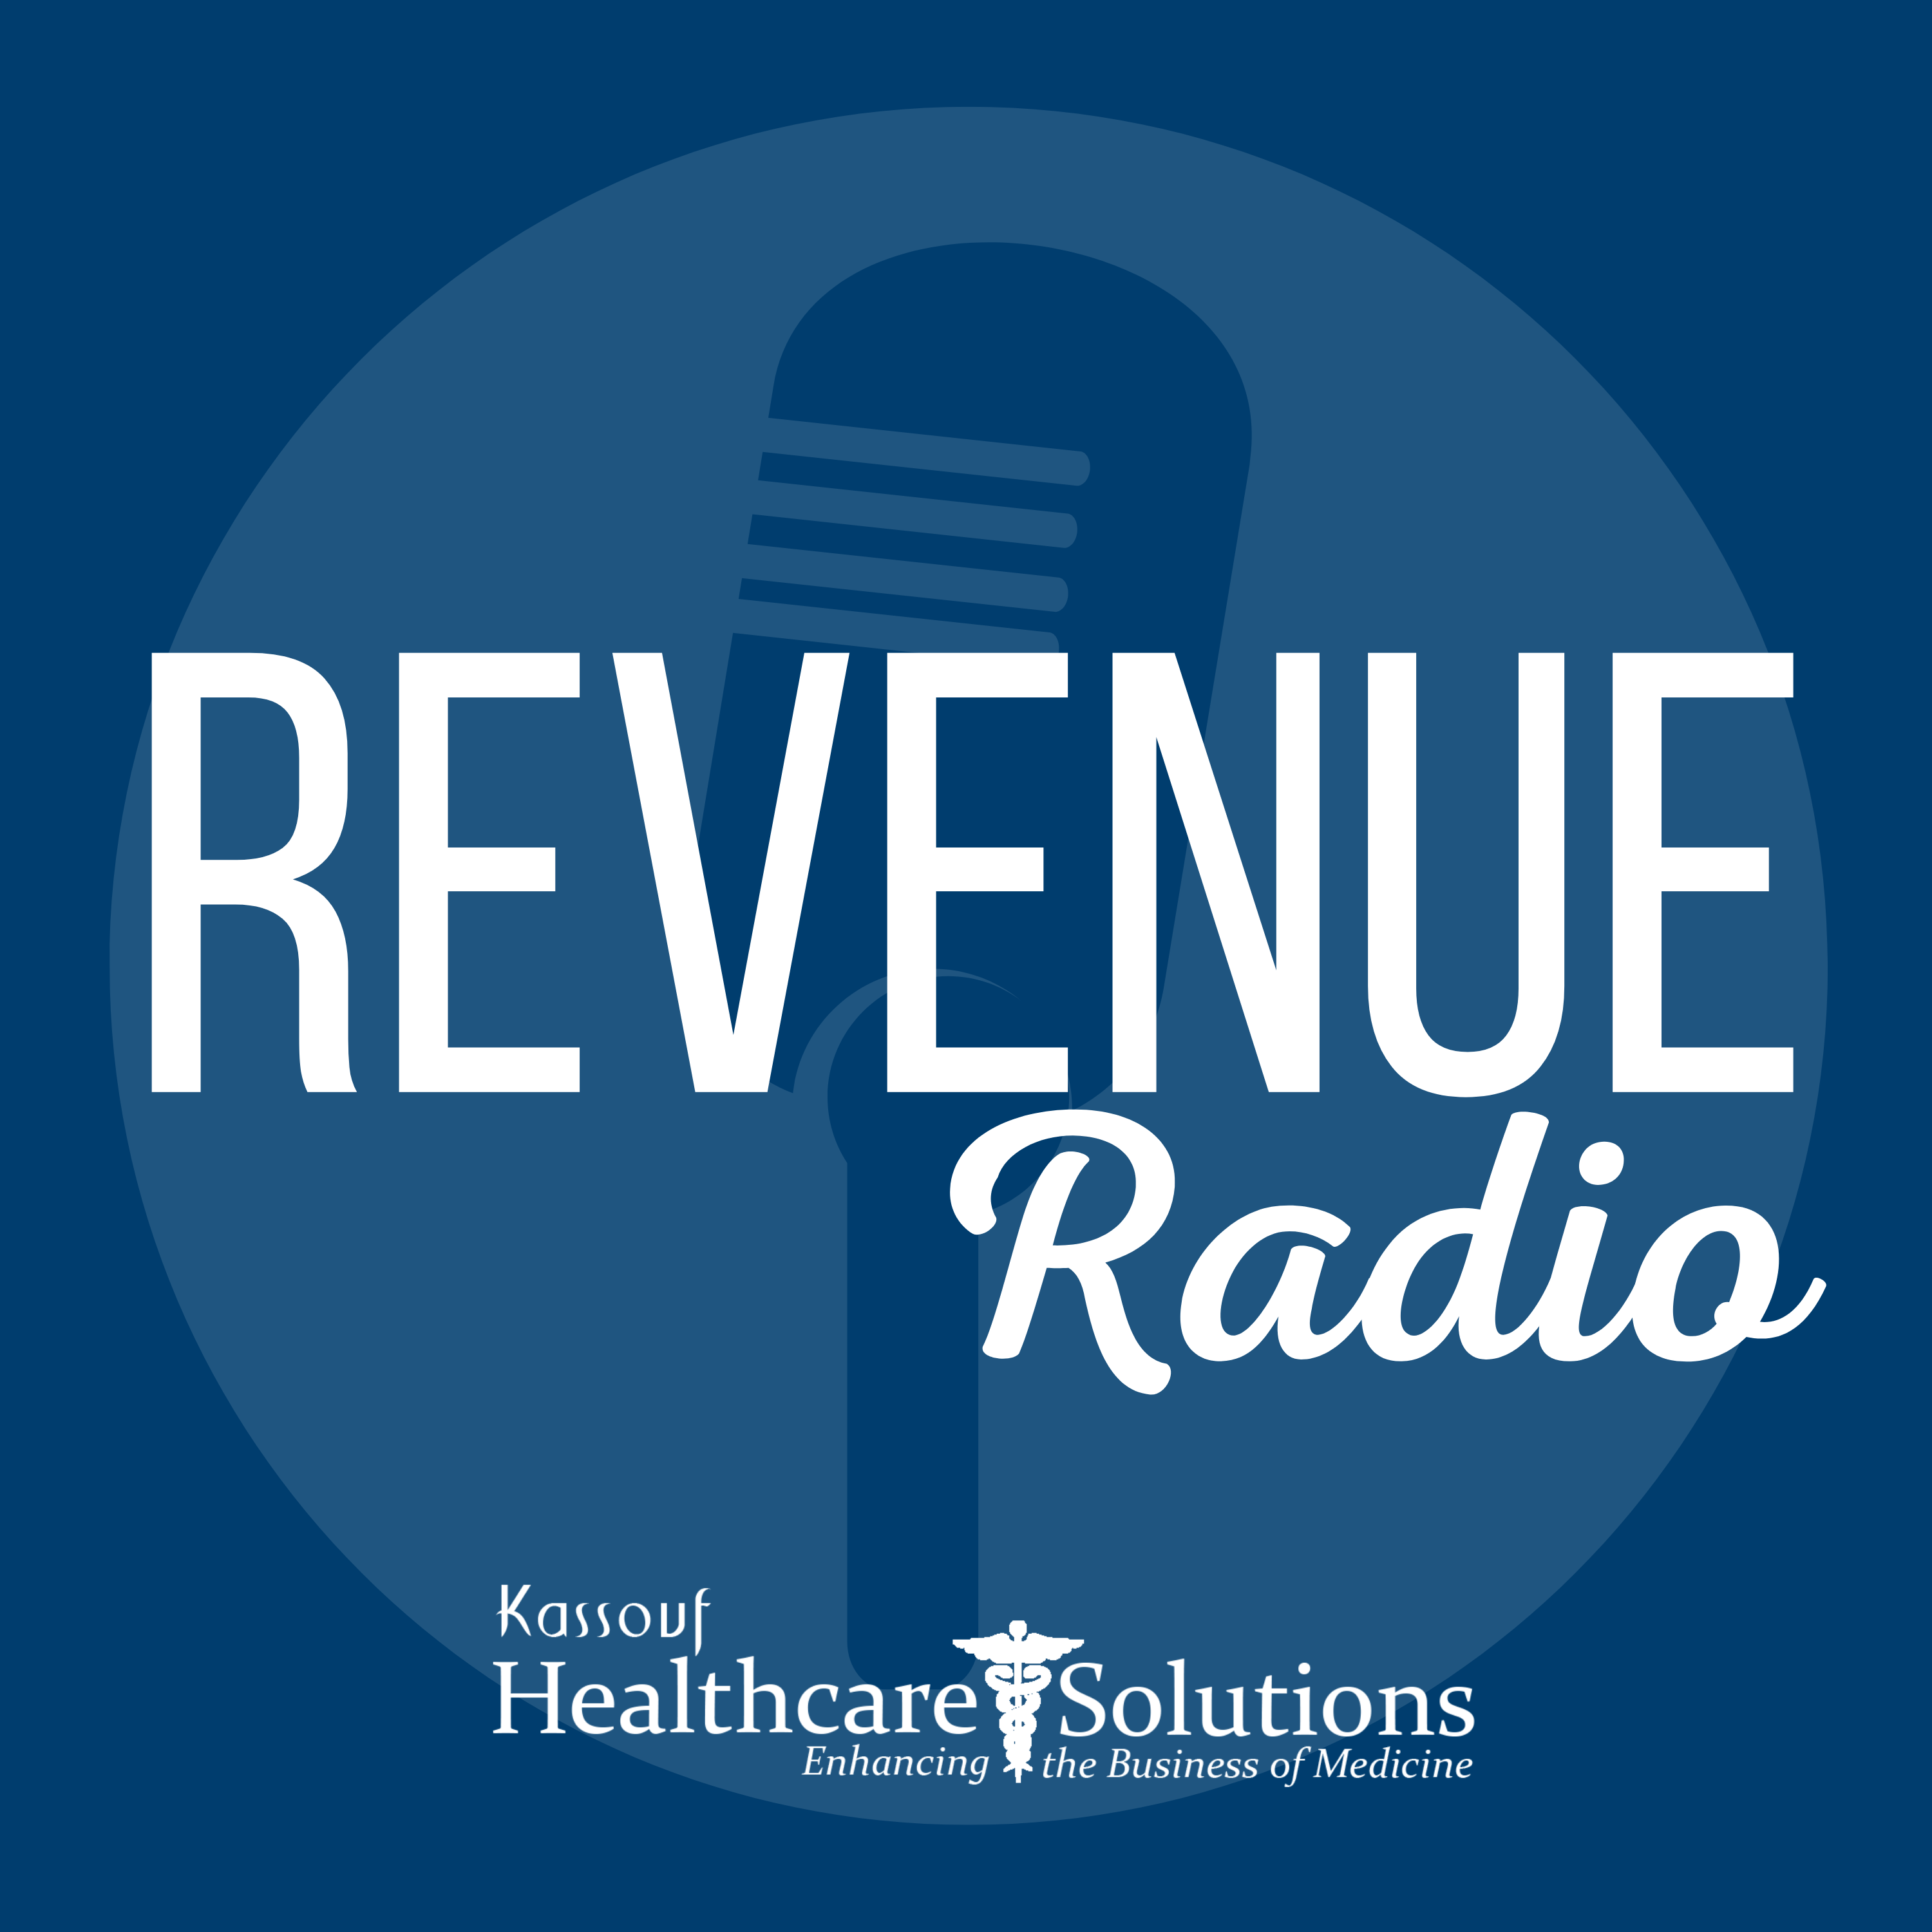 Revenue Radio: Making the most of merchant services